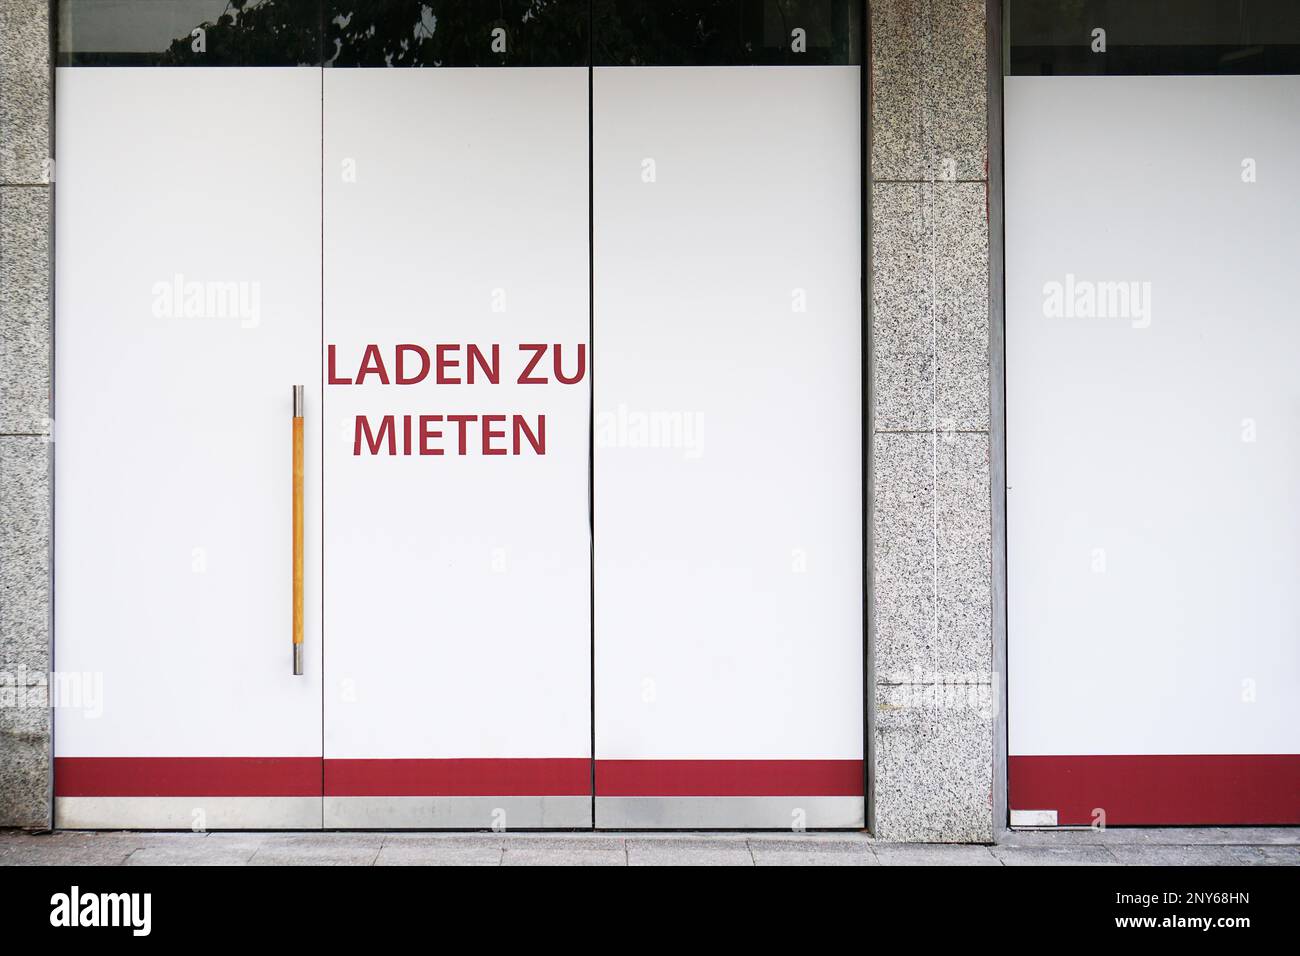 German vacancy sign on storefront - Laden zu mieten translates as store to let Stock Photo